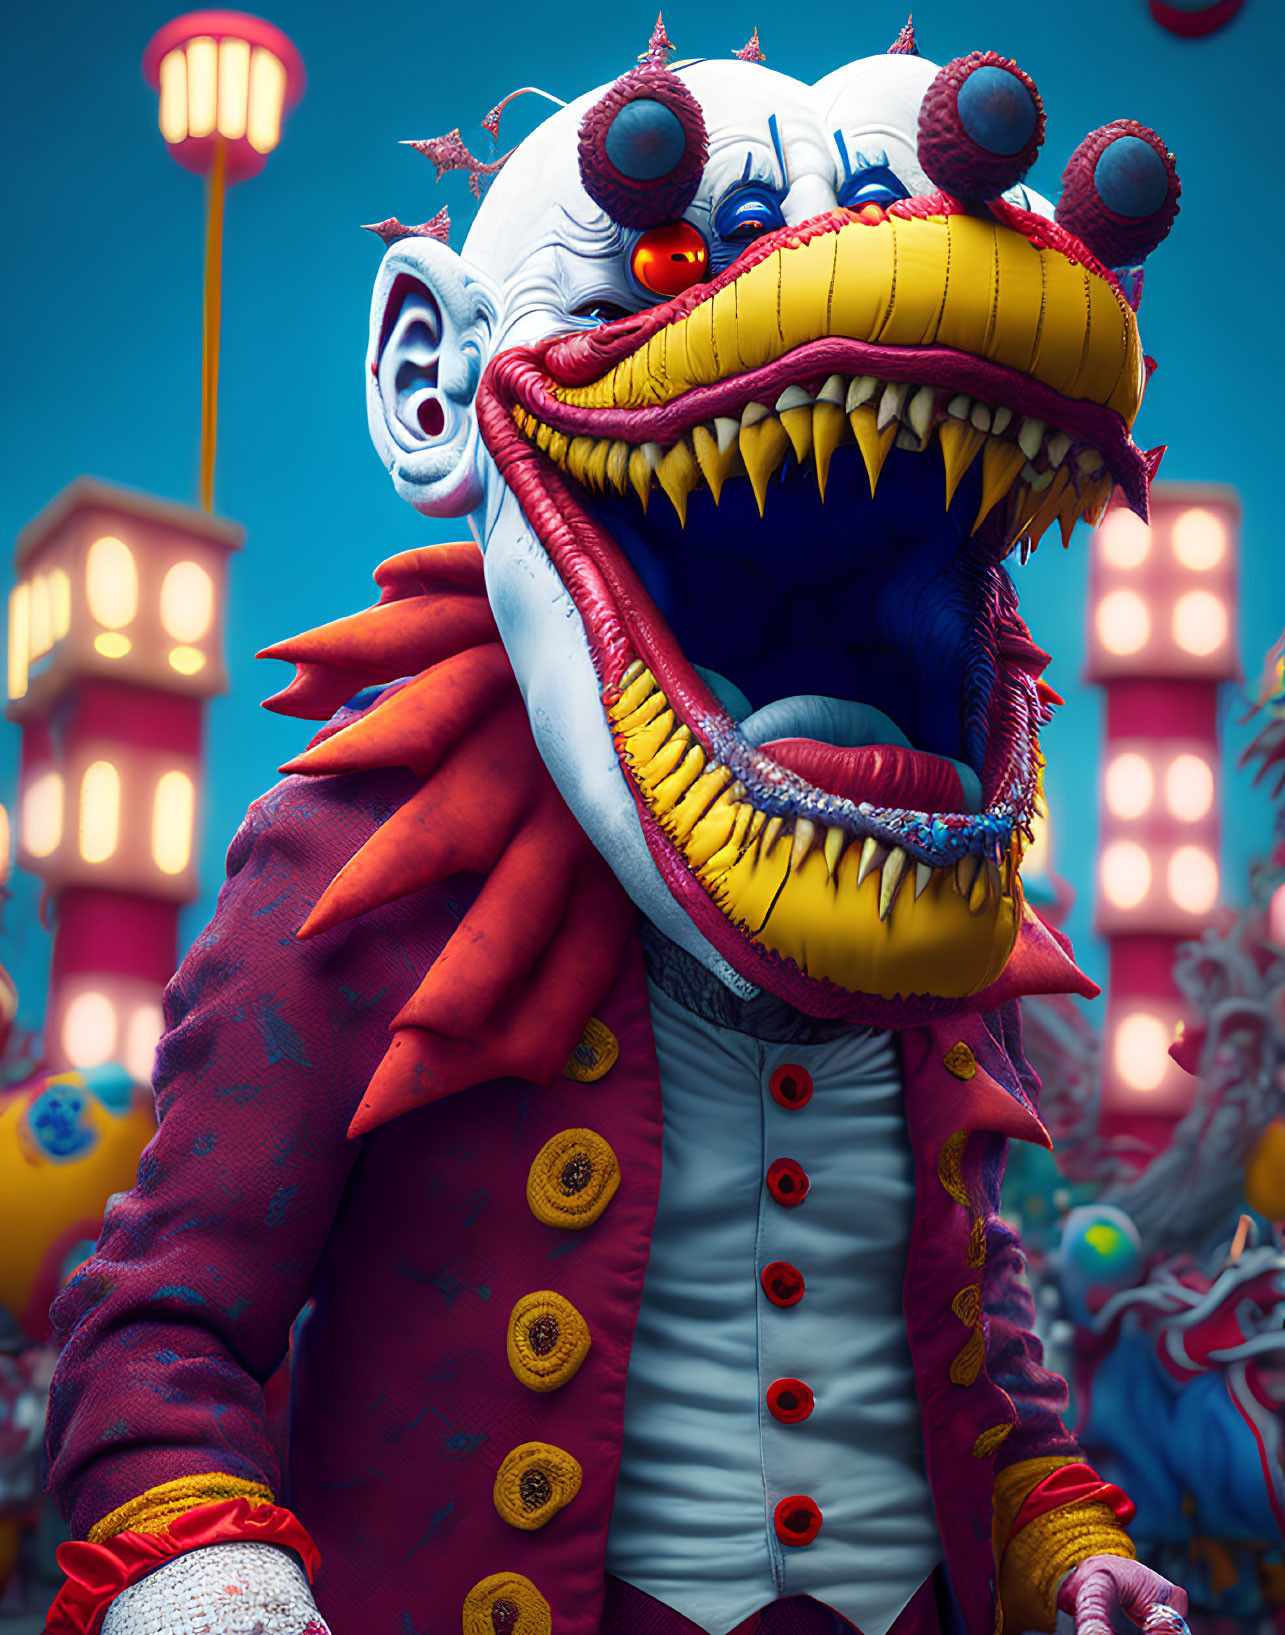 Colorful Crocodile-Headed Creature in Red Jacket on Neon Background